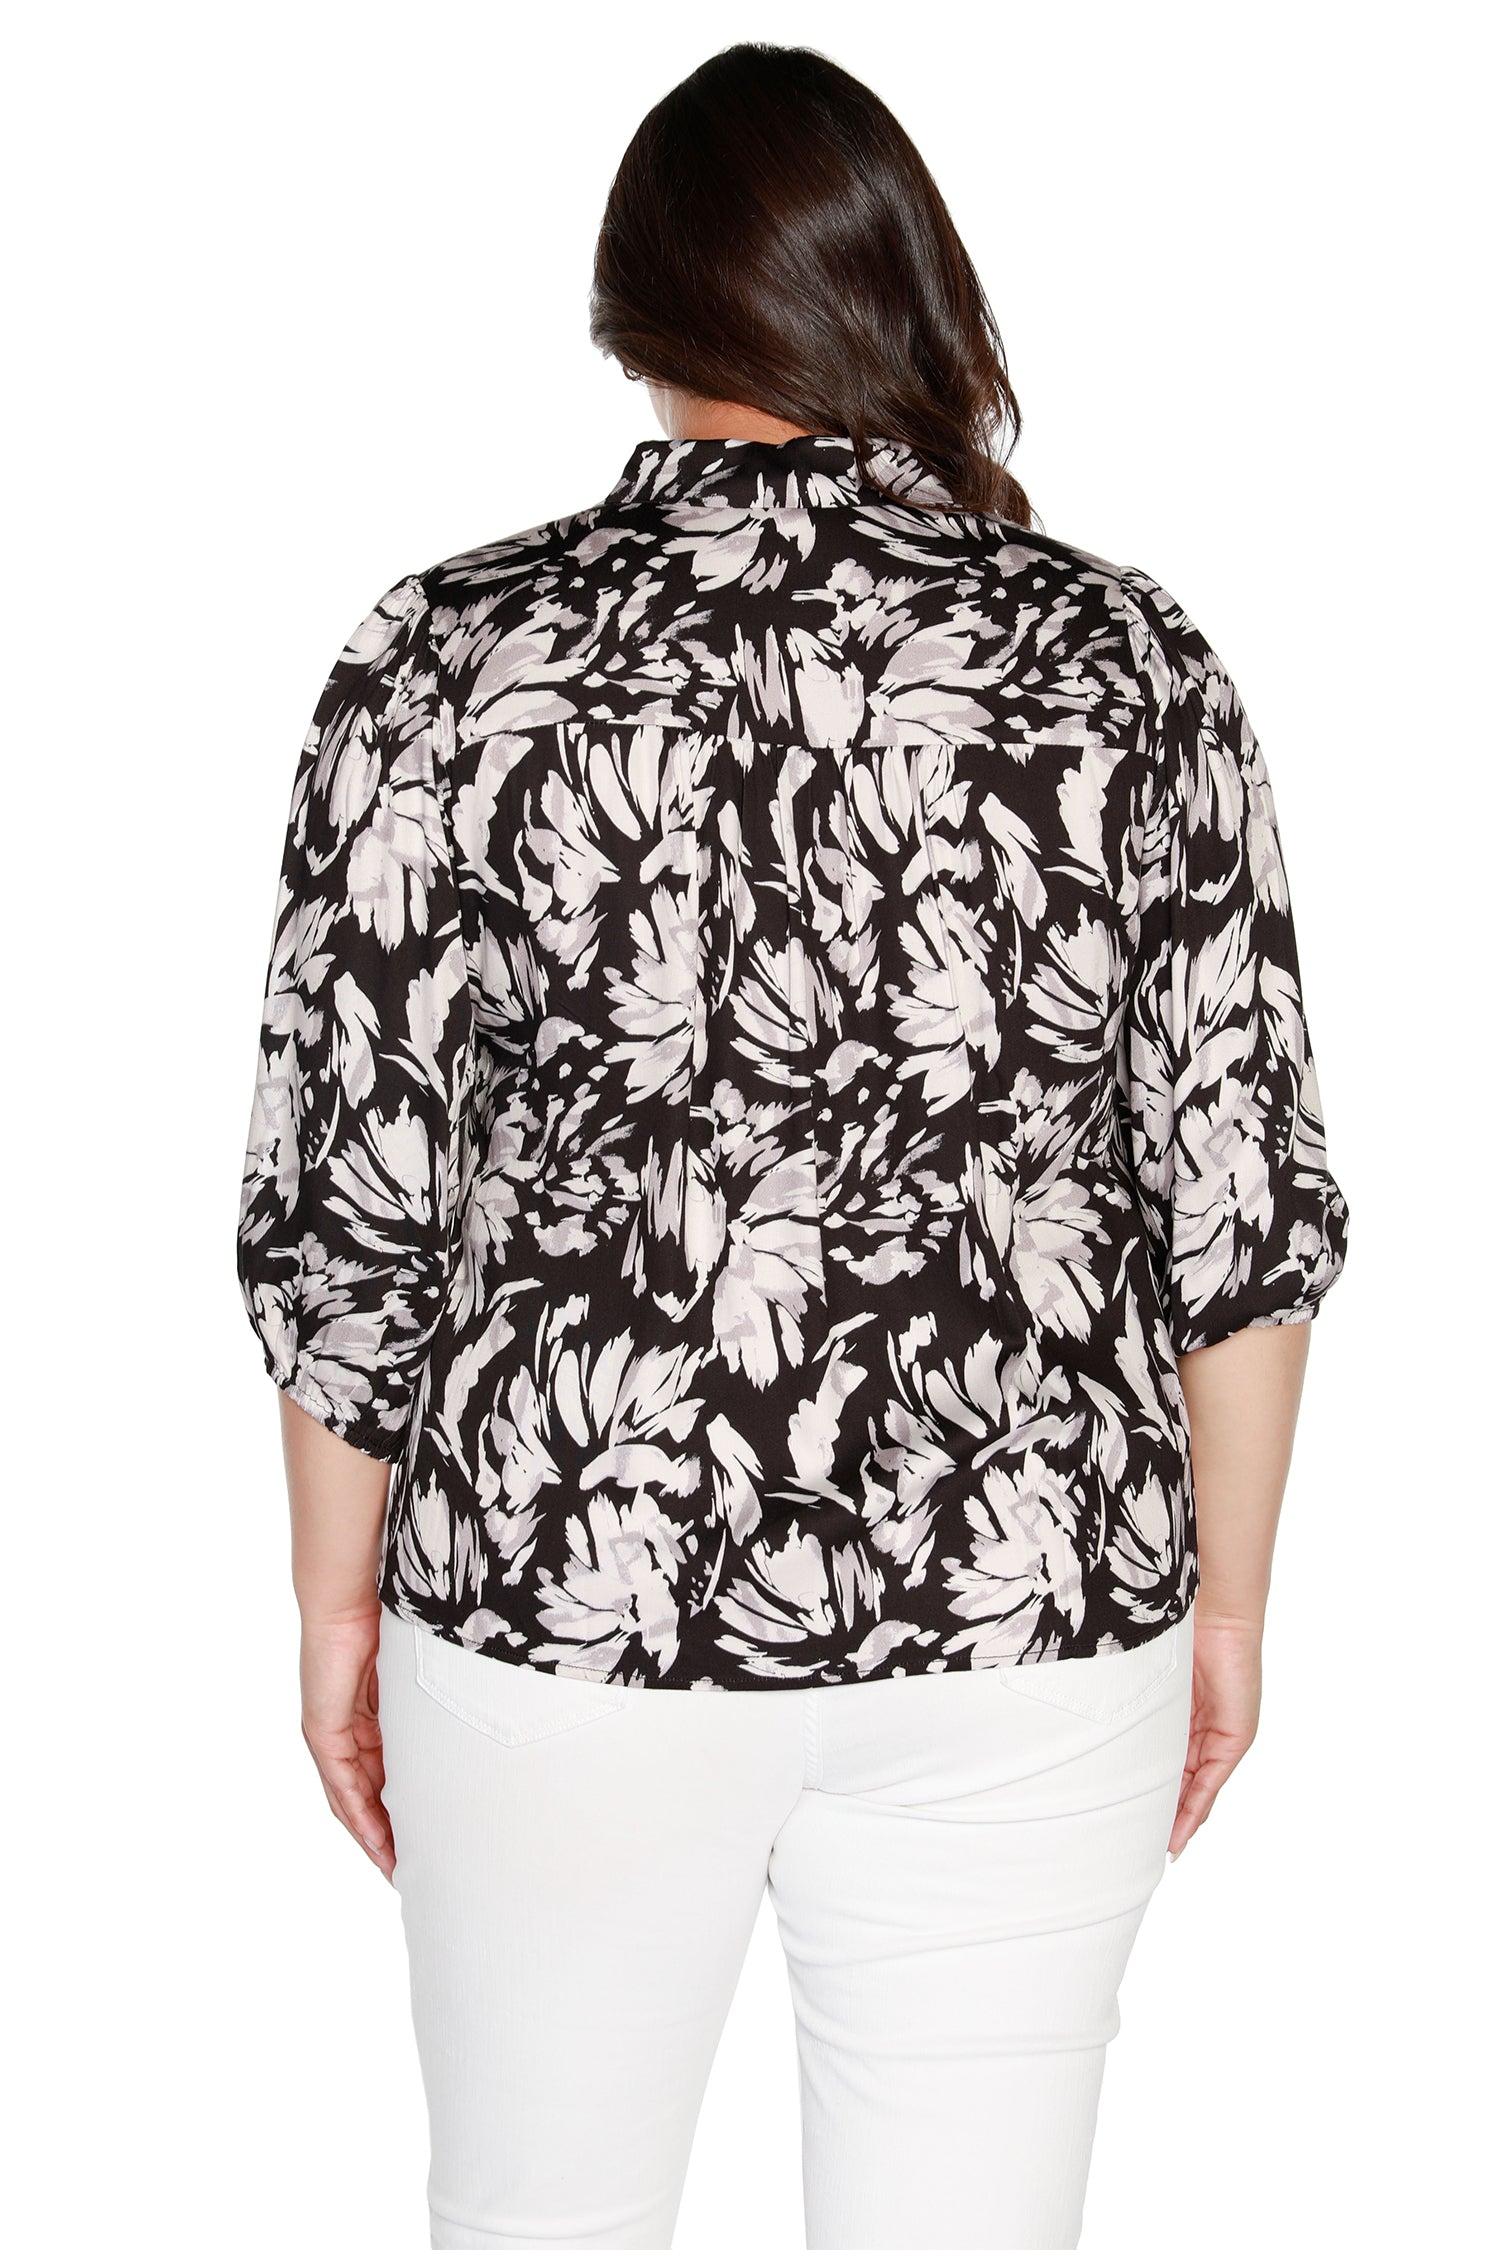 Women’s Floral Button Up Blouse with Collar and 3/4 Sleeves | Curvy